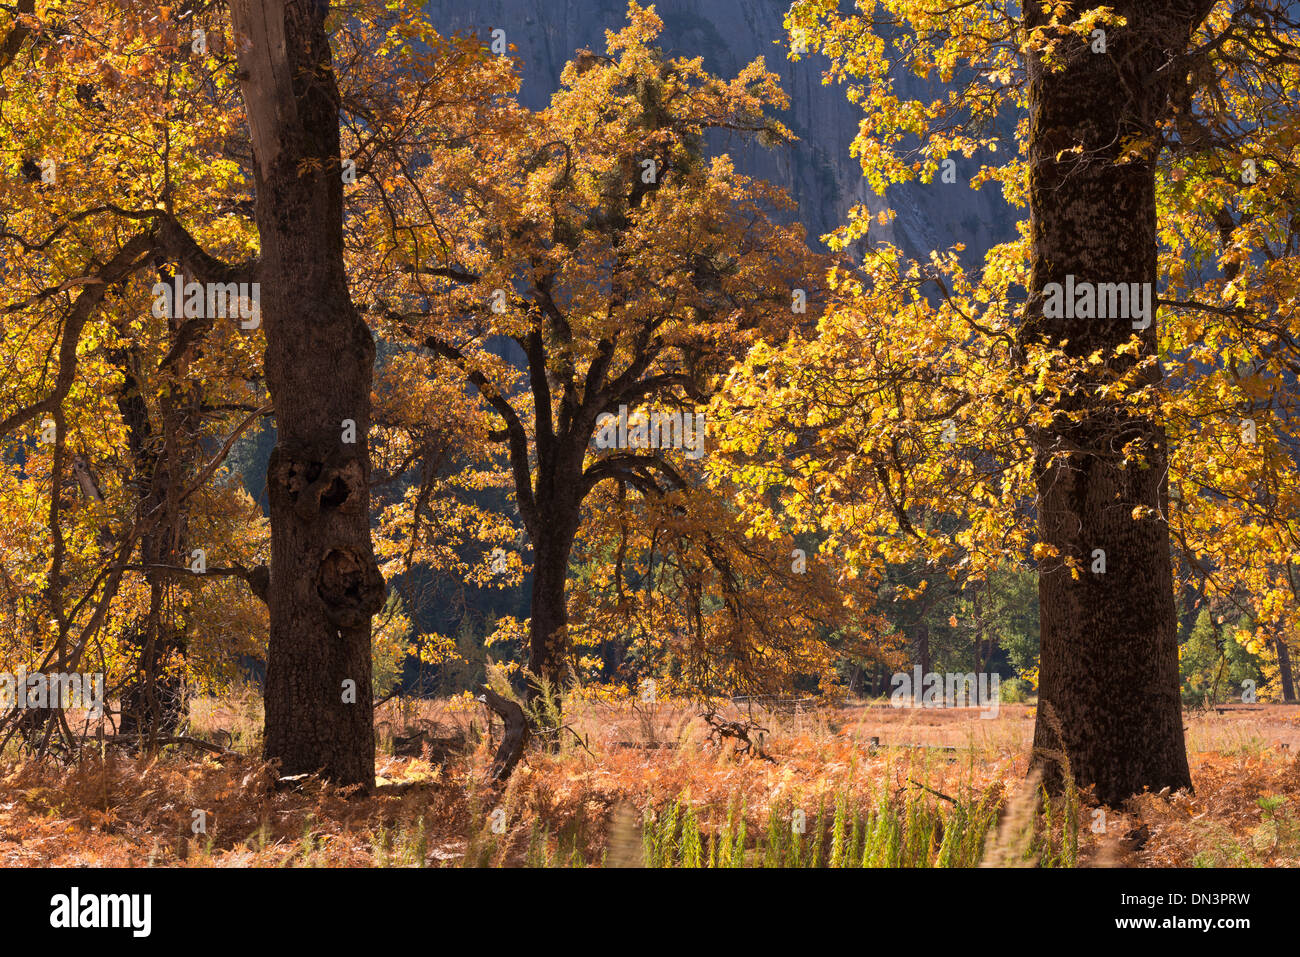 Black Oaks with spectacular autumnal colours in Yosemite Valley, California, USA. Autumn (October) 2013. Stock Photo